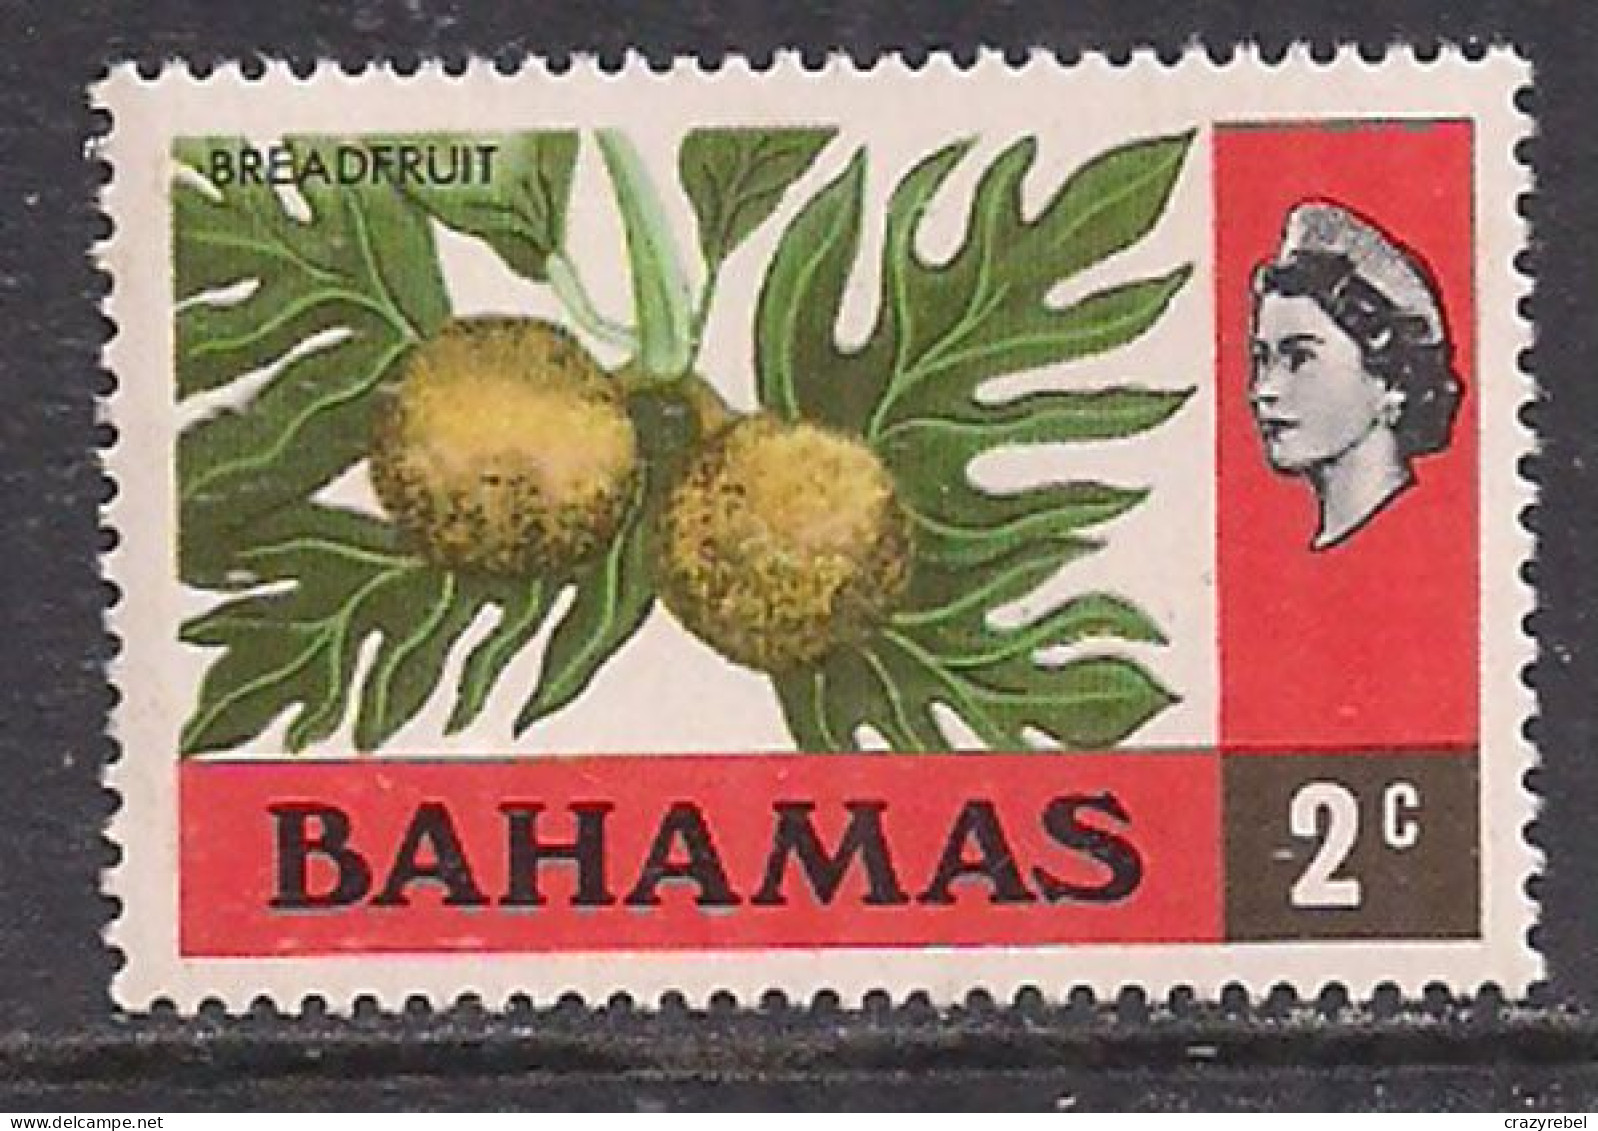 Bahamas 1971 QE2 2cents Breadfruit SG 360 MNH ( J1034 ) - 1963-1973 Ministerial Government